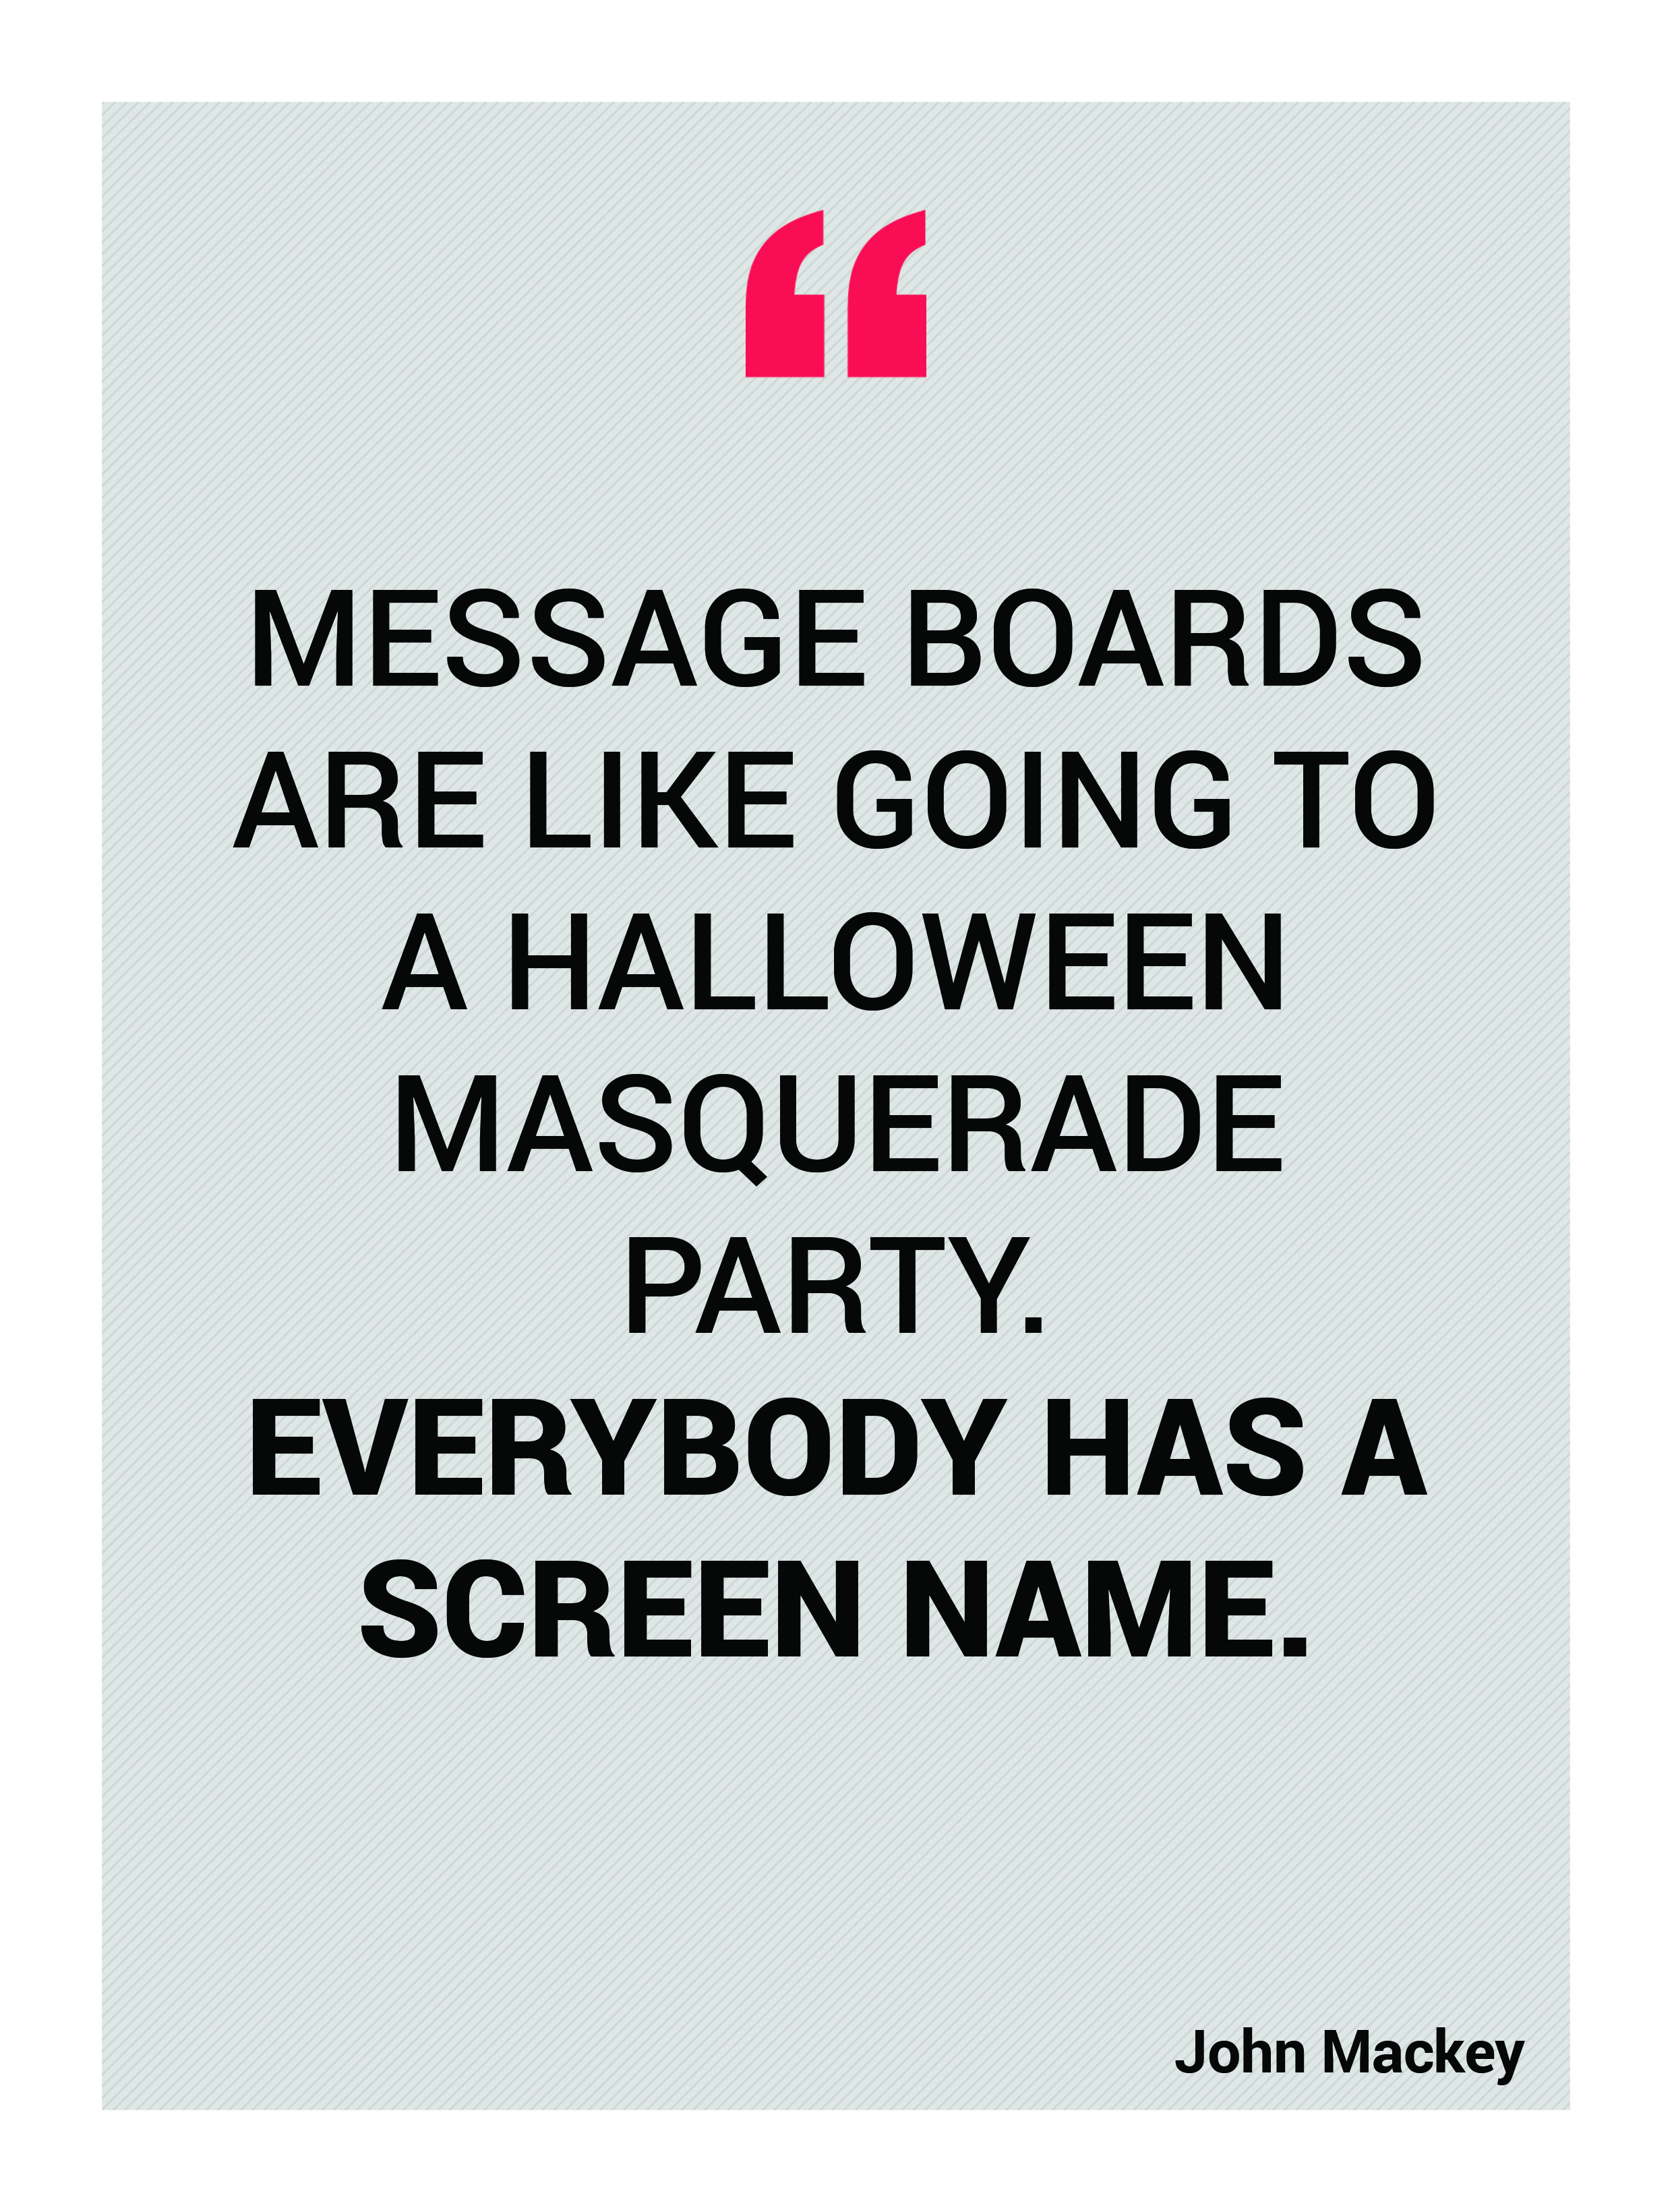 Message boards are like going to a Halloween masquerade party. Everybody has a screen name. John Mackey